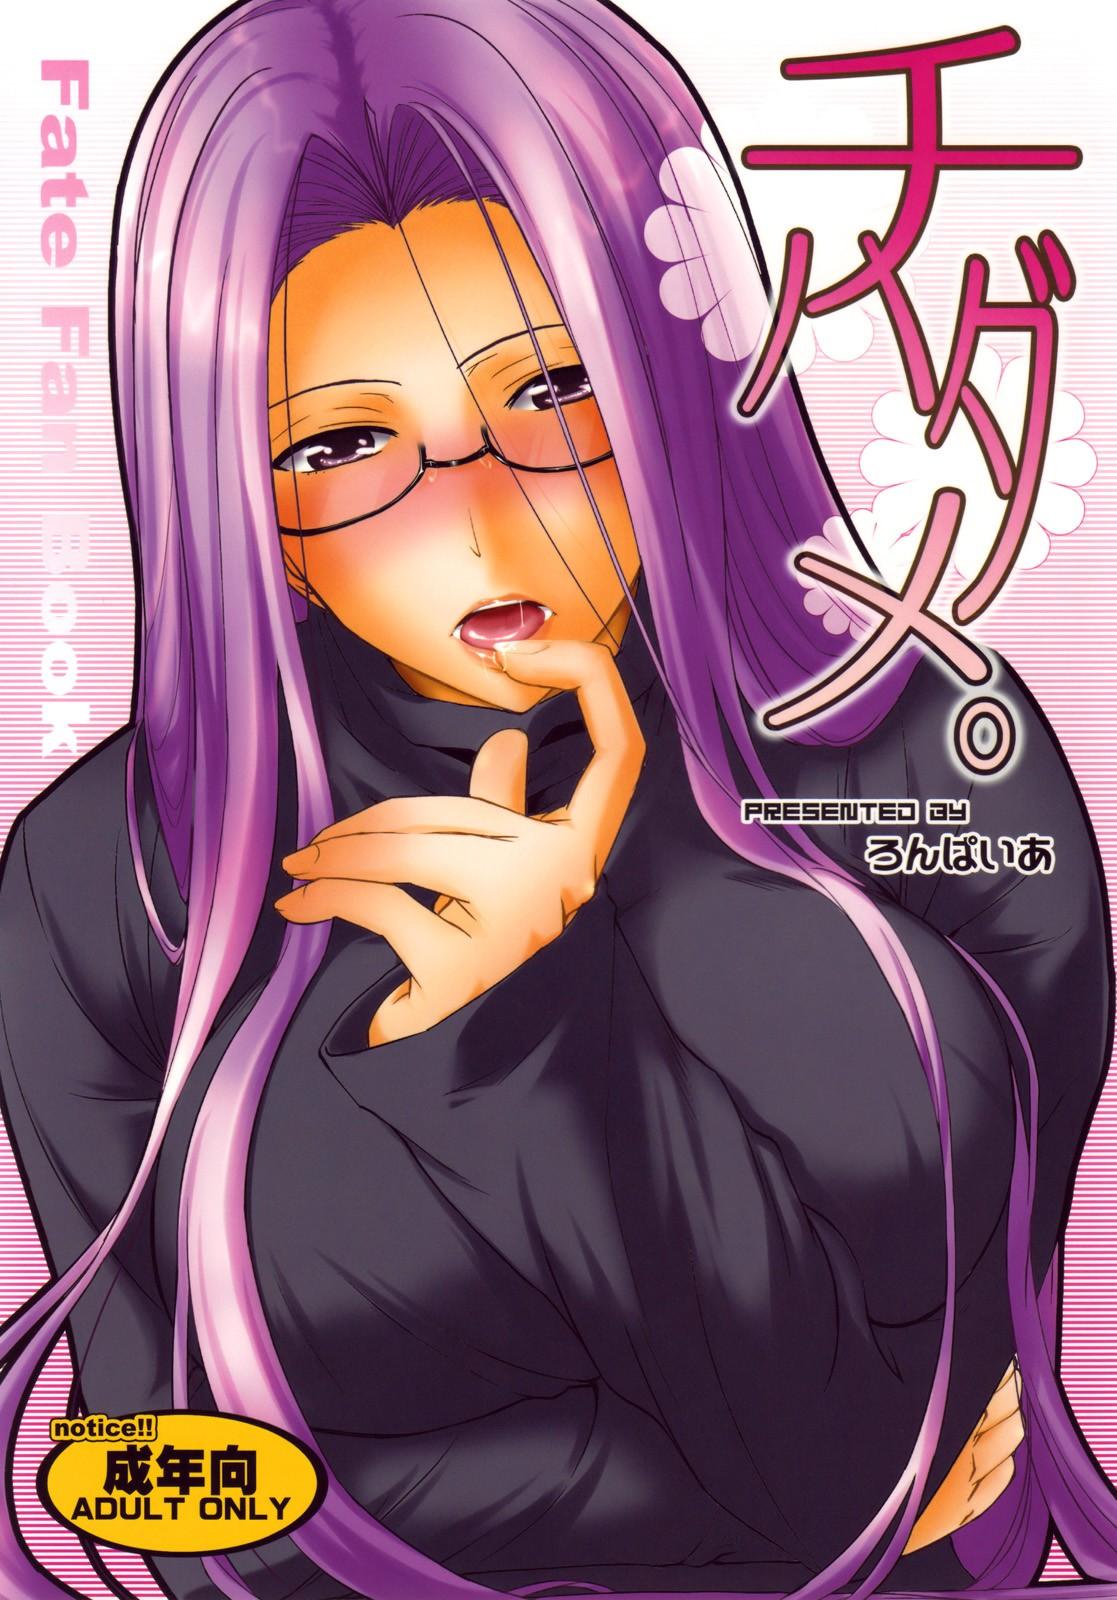 Moneytalks Chihadame. - Fate stay night Housewife - Picture 1